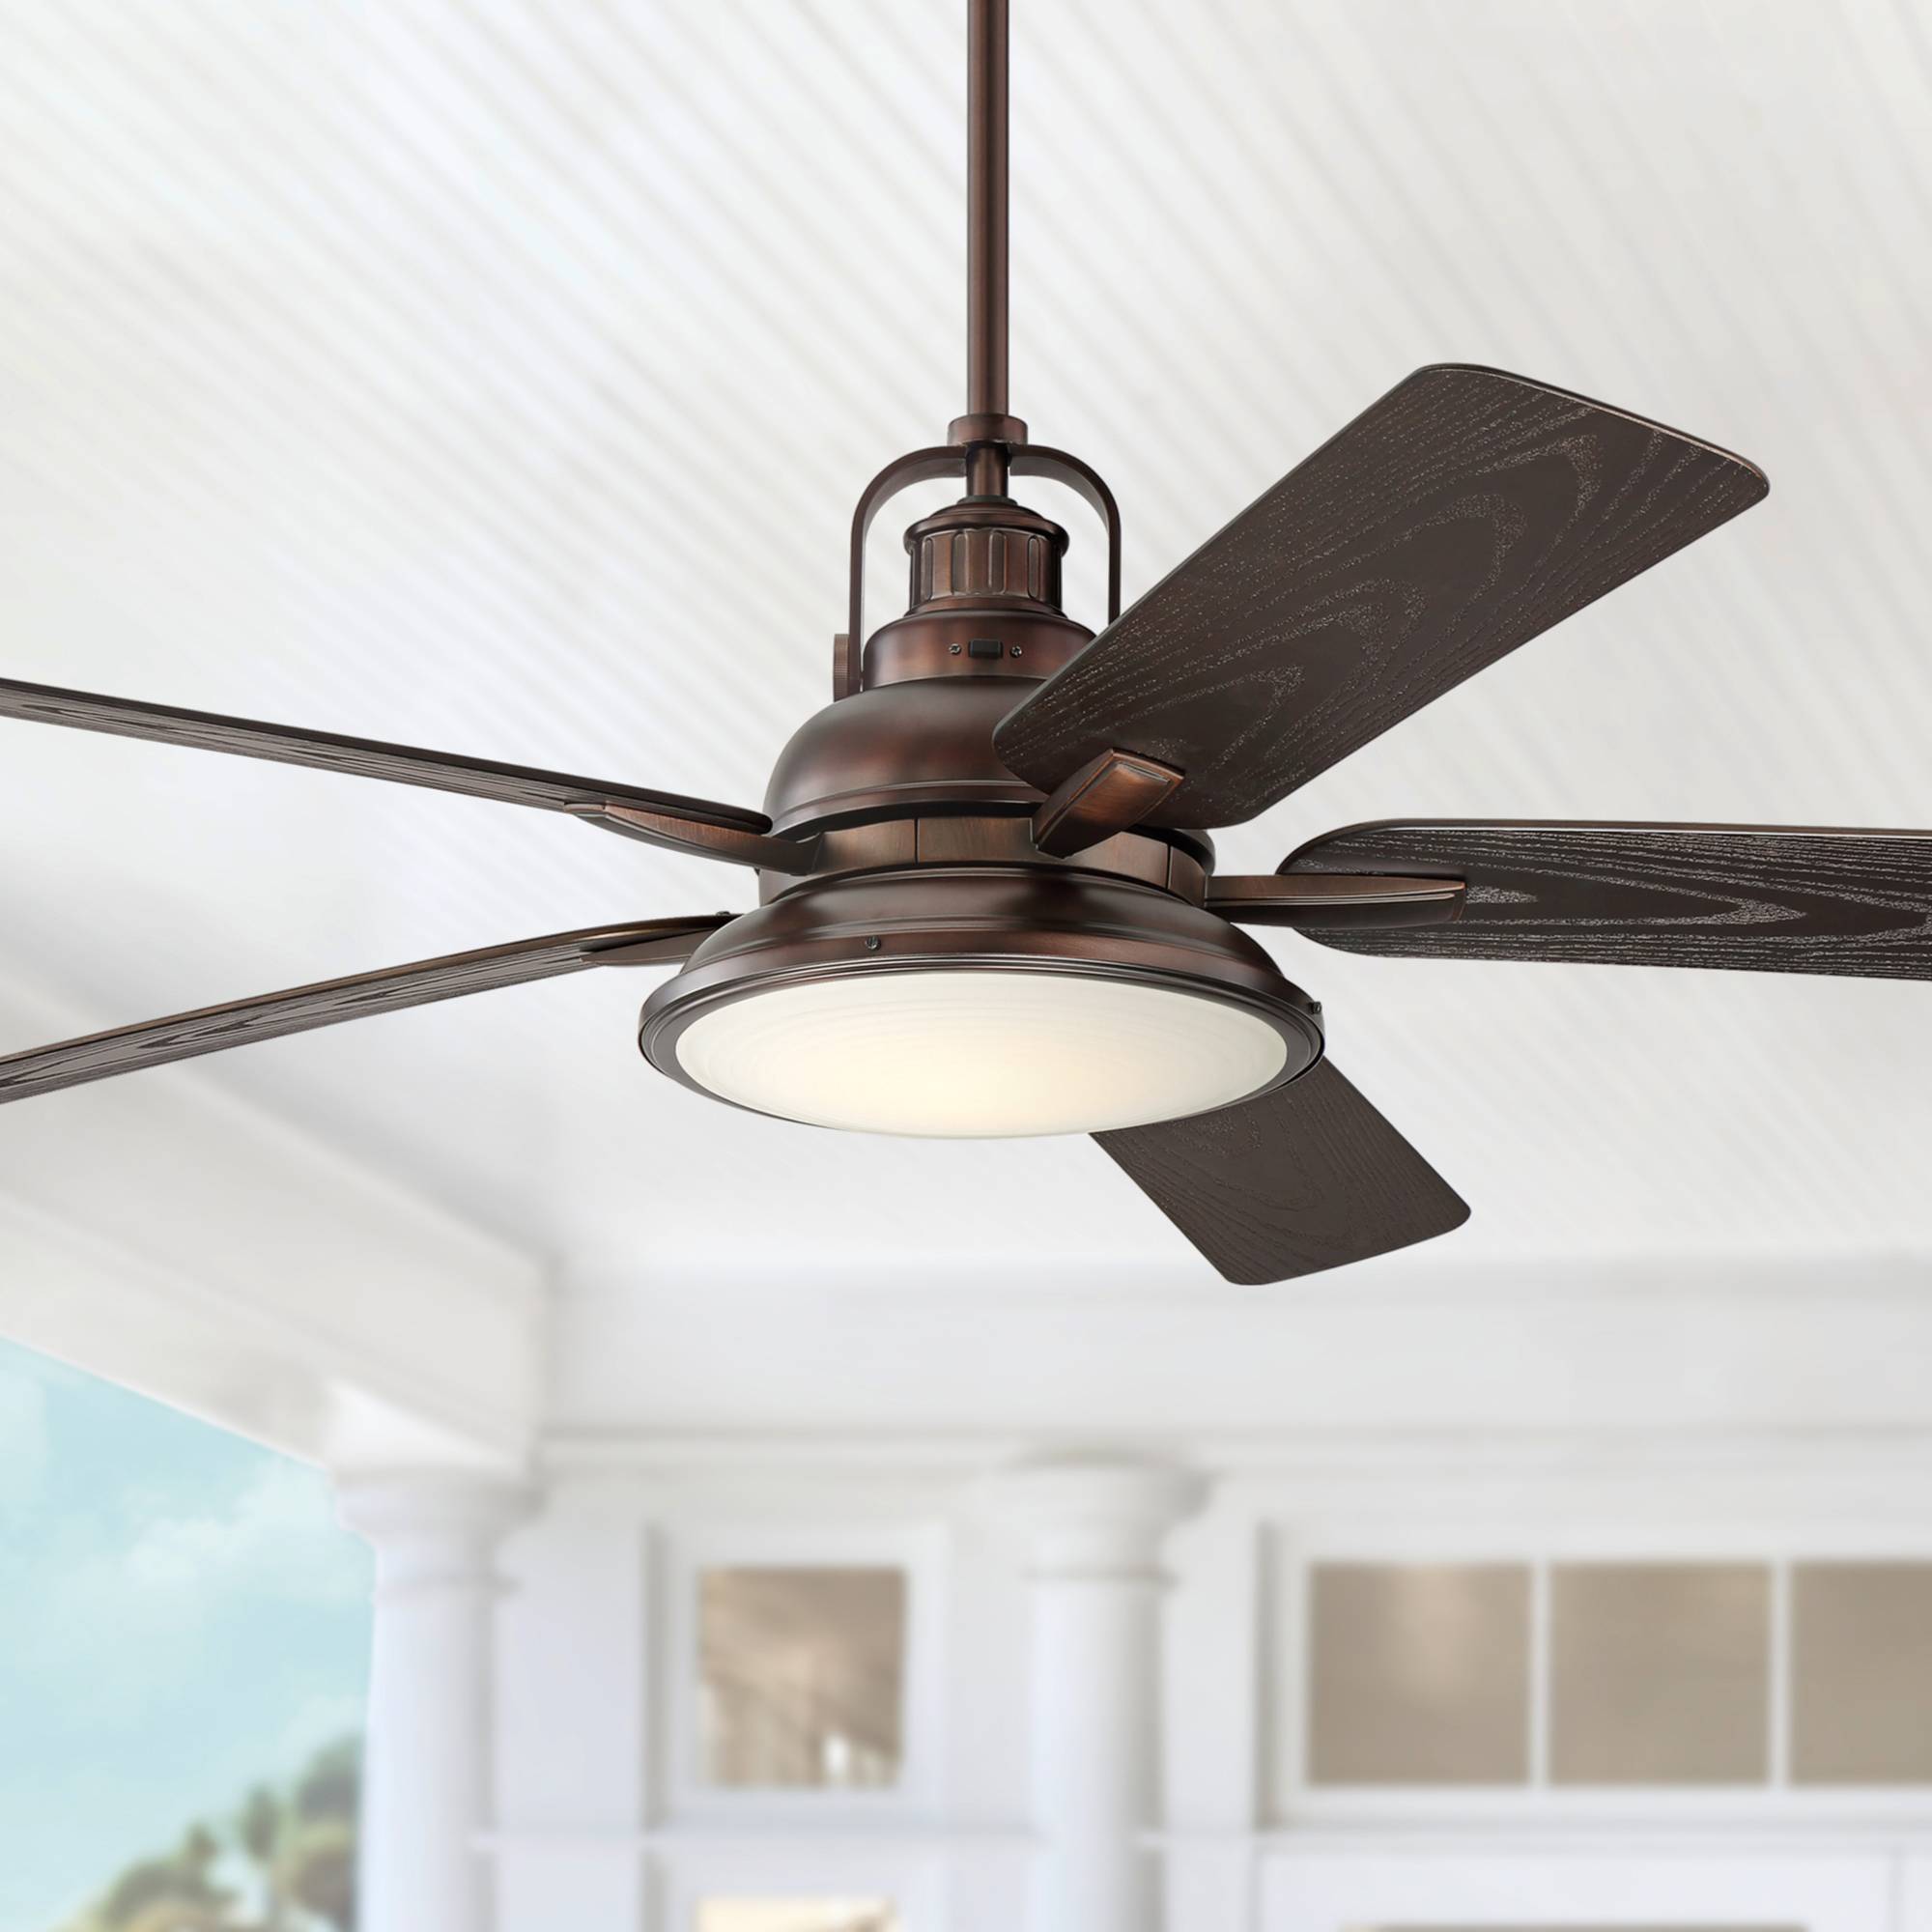 60 Industrial Outdoor Ceiling Fan With Light Led Bronze Wet For